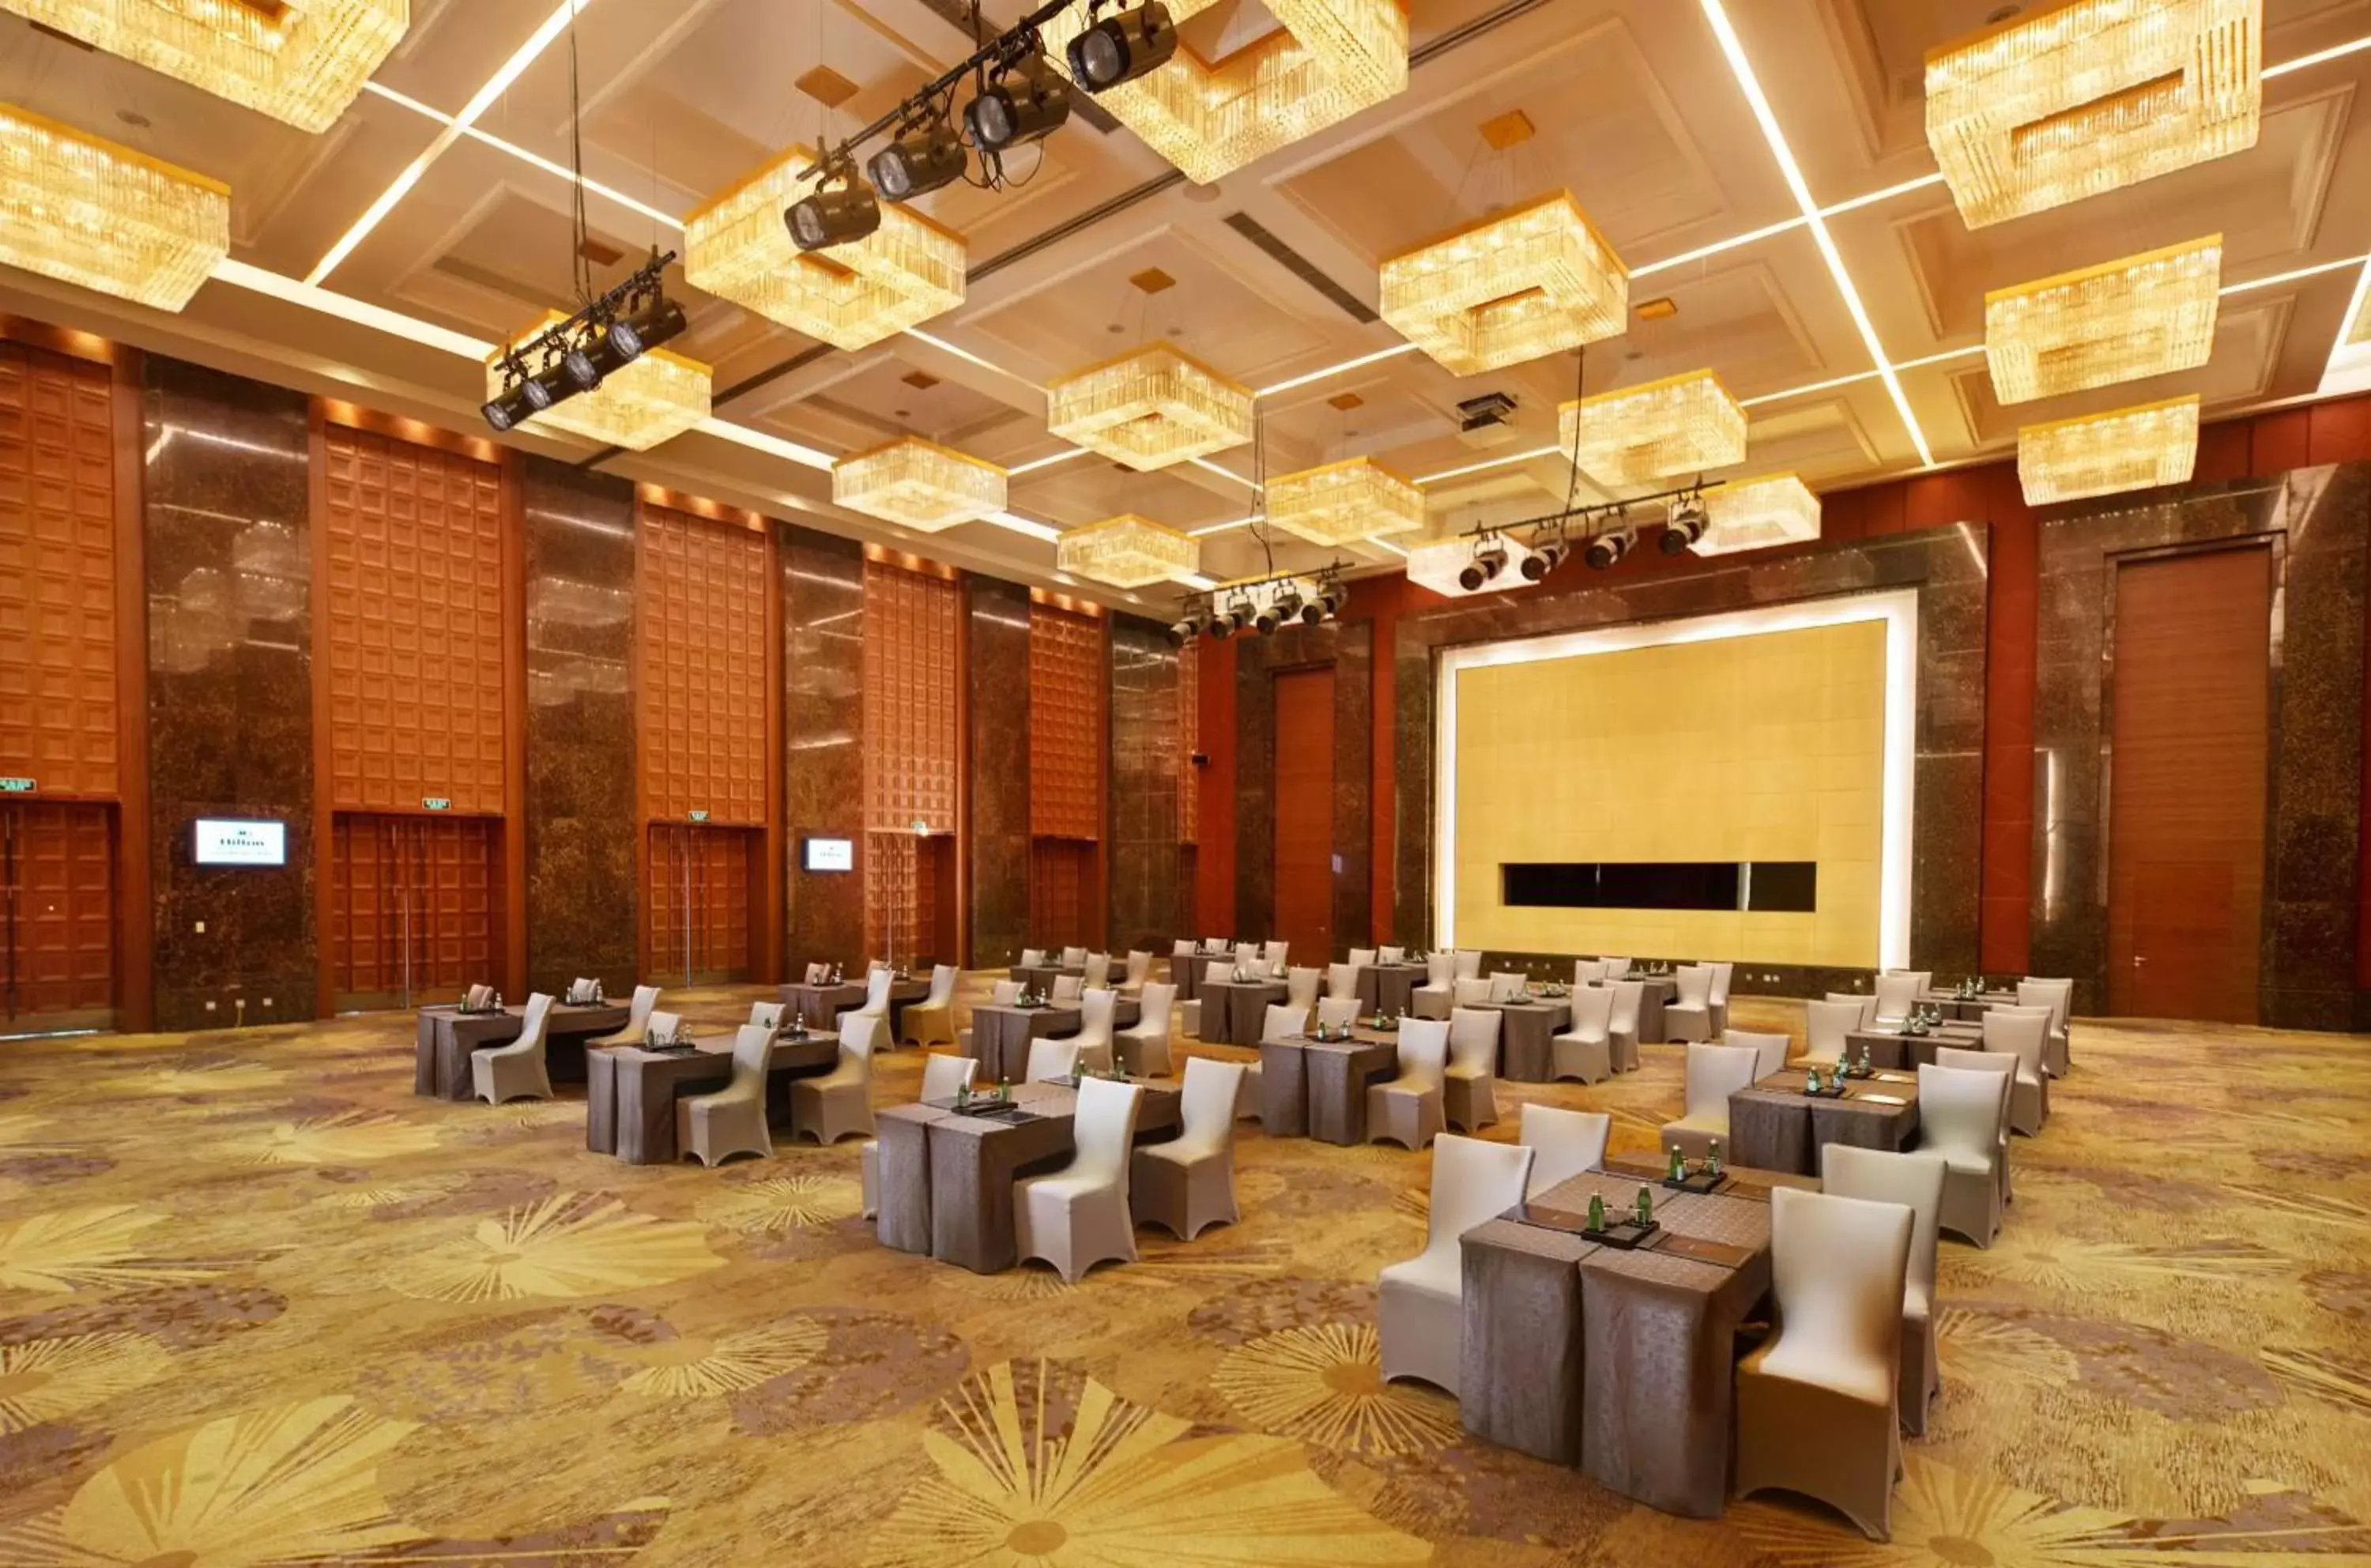 Meeting/conference room, Banquet Facilities in Hilton Beijing Capital Airport